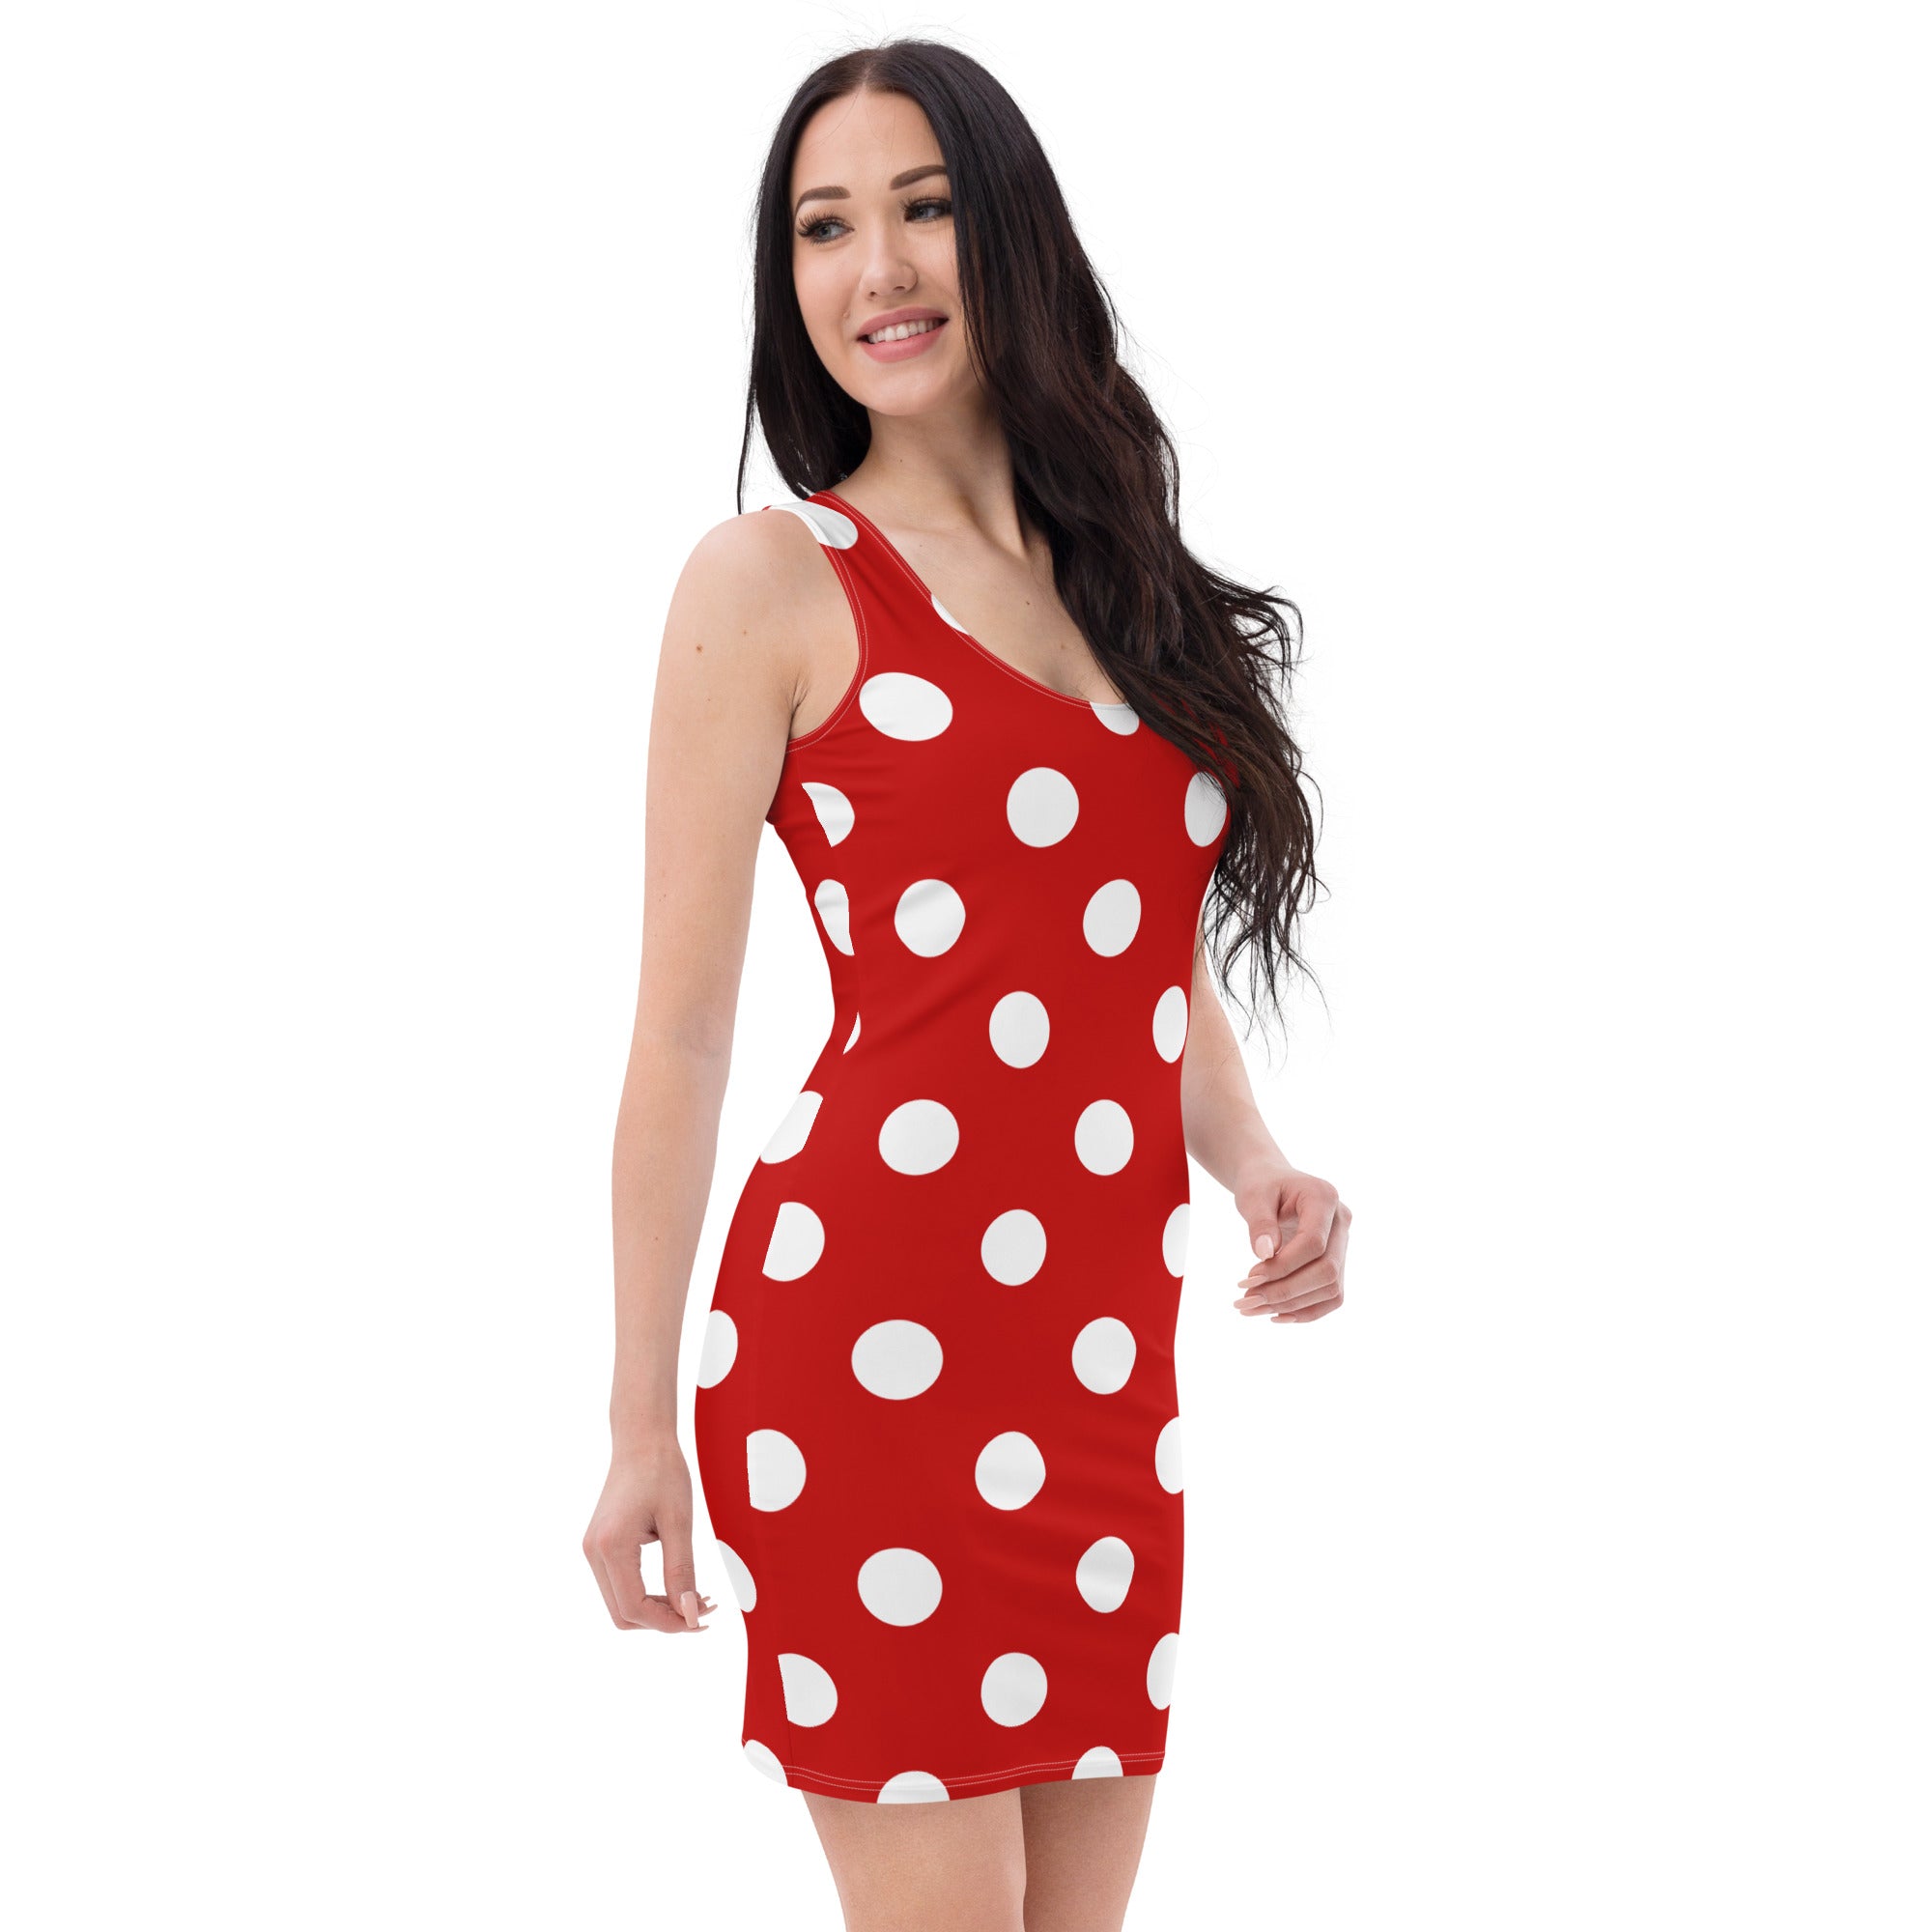 Classic Polka Dot Red and White Fitted Dress, lioness-love